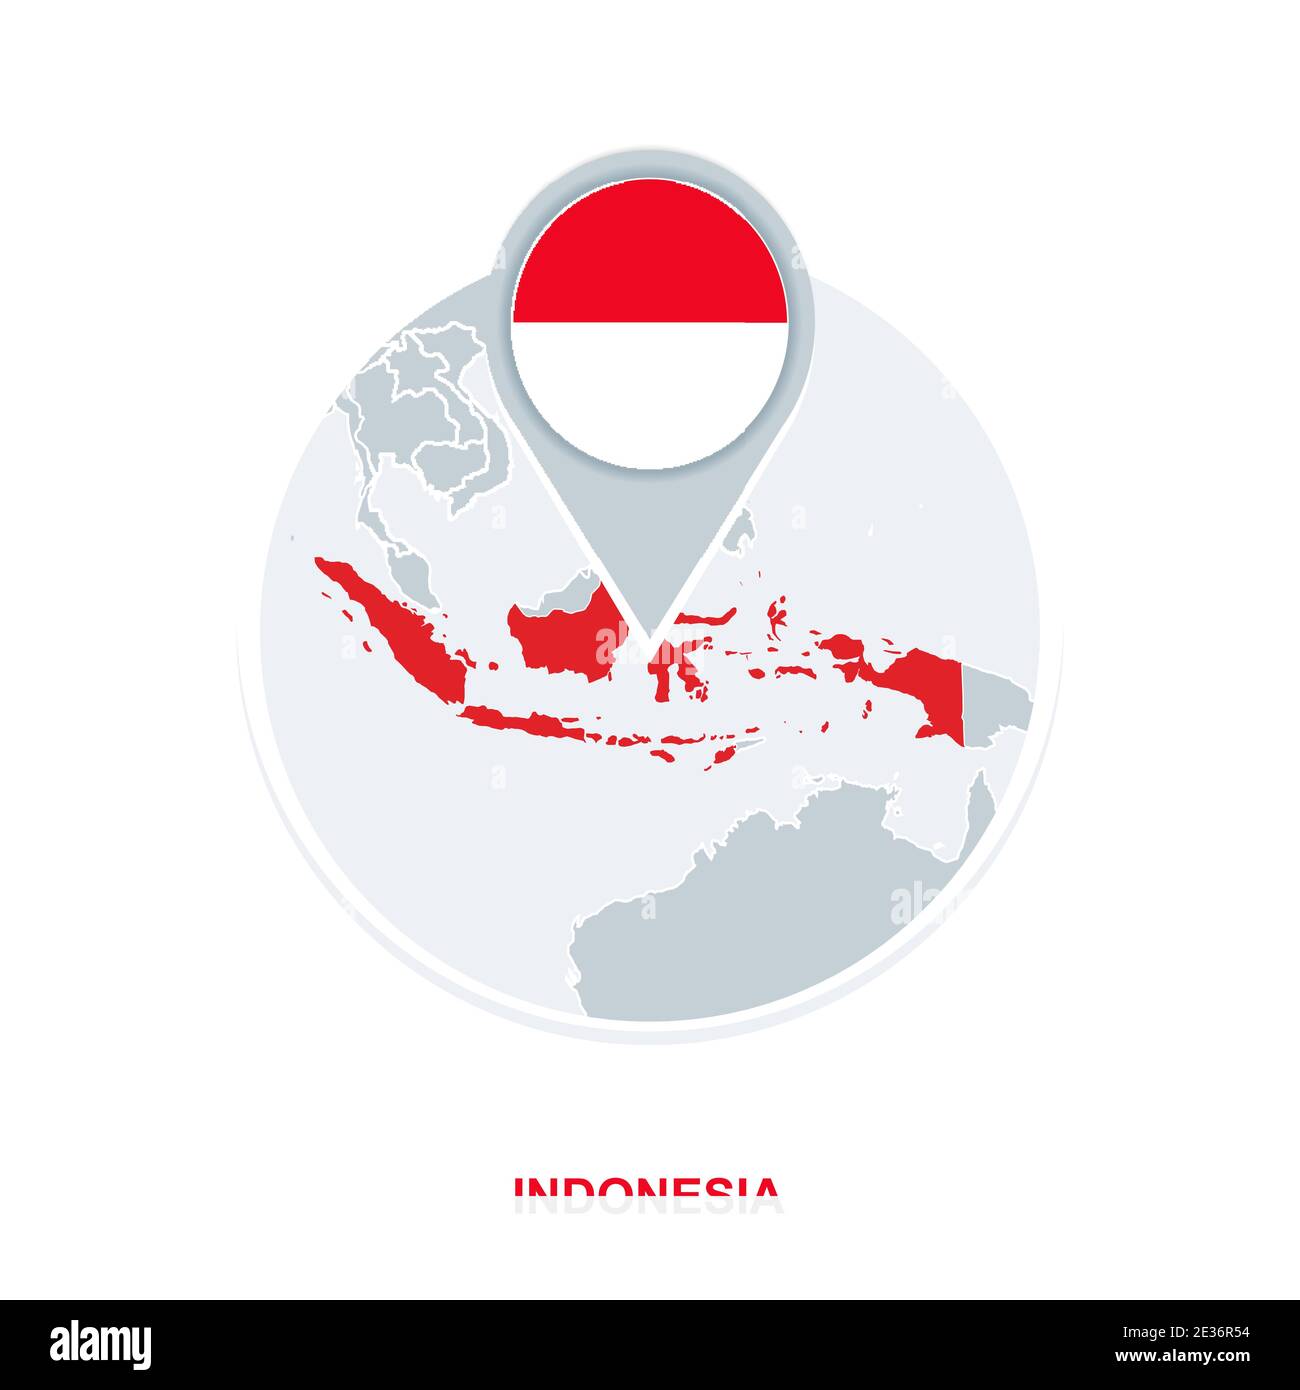 Indonesia map and flag, vector map icon with highlighted Indonesia Stock Vector